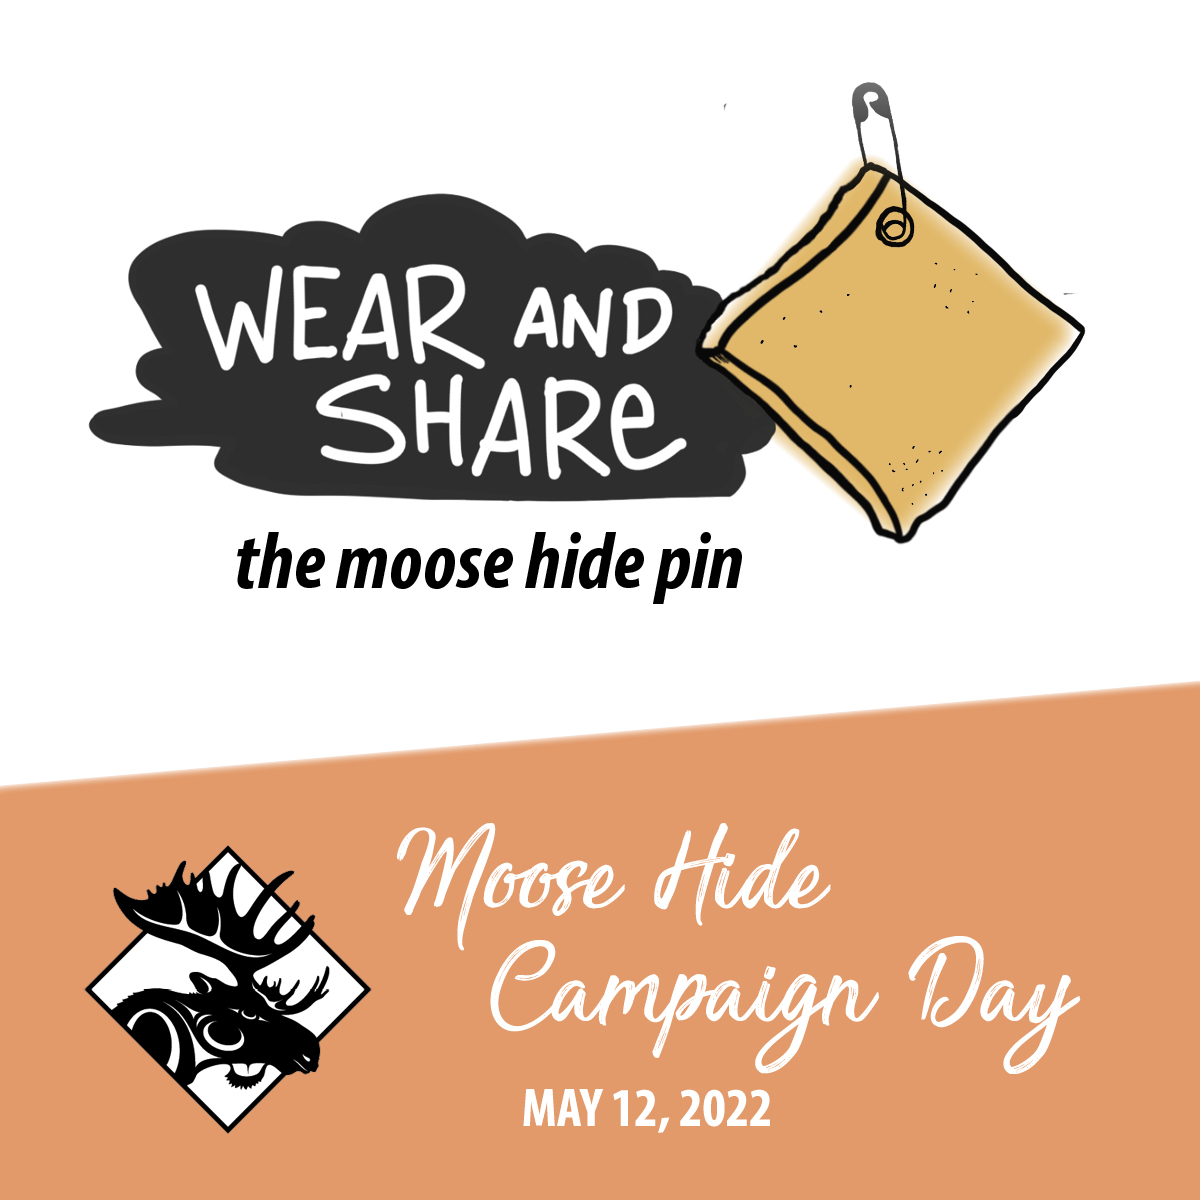 Moose Hide Campaign - Wear and Share Pin